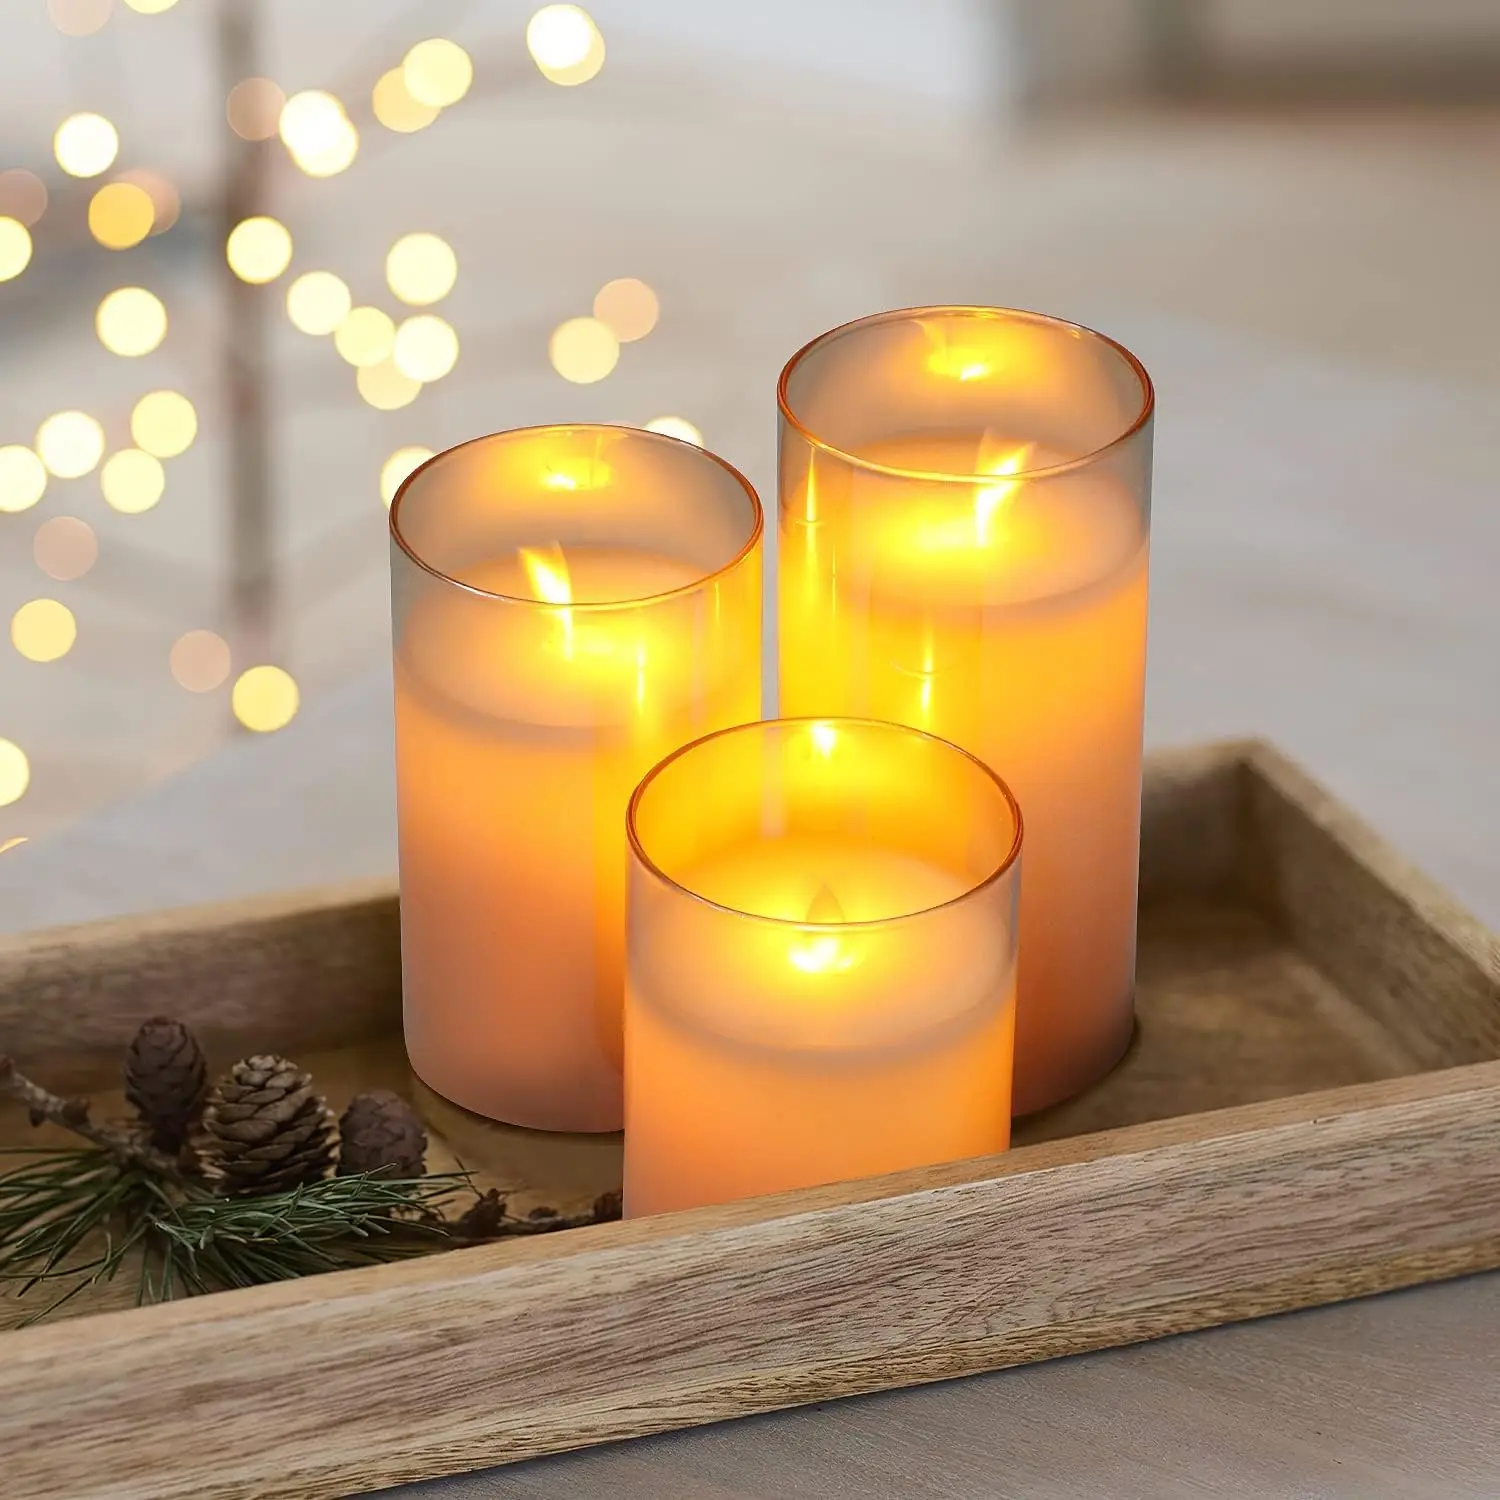 

USB Rechargeable/Battery operated LED Glass Candle w/Remote controller Pillar Candle Paraffin Wax Dancing wick Home Decor-Amber